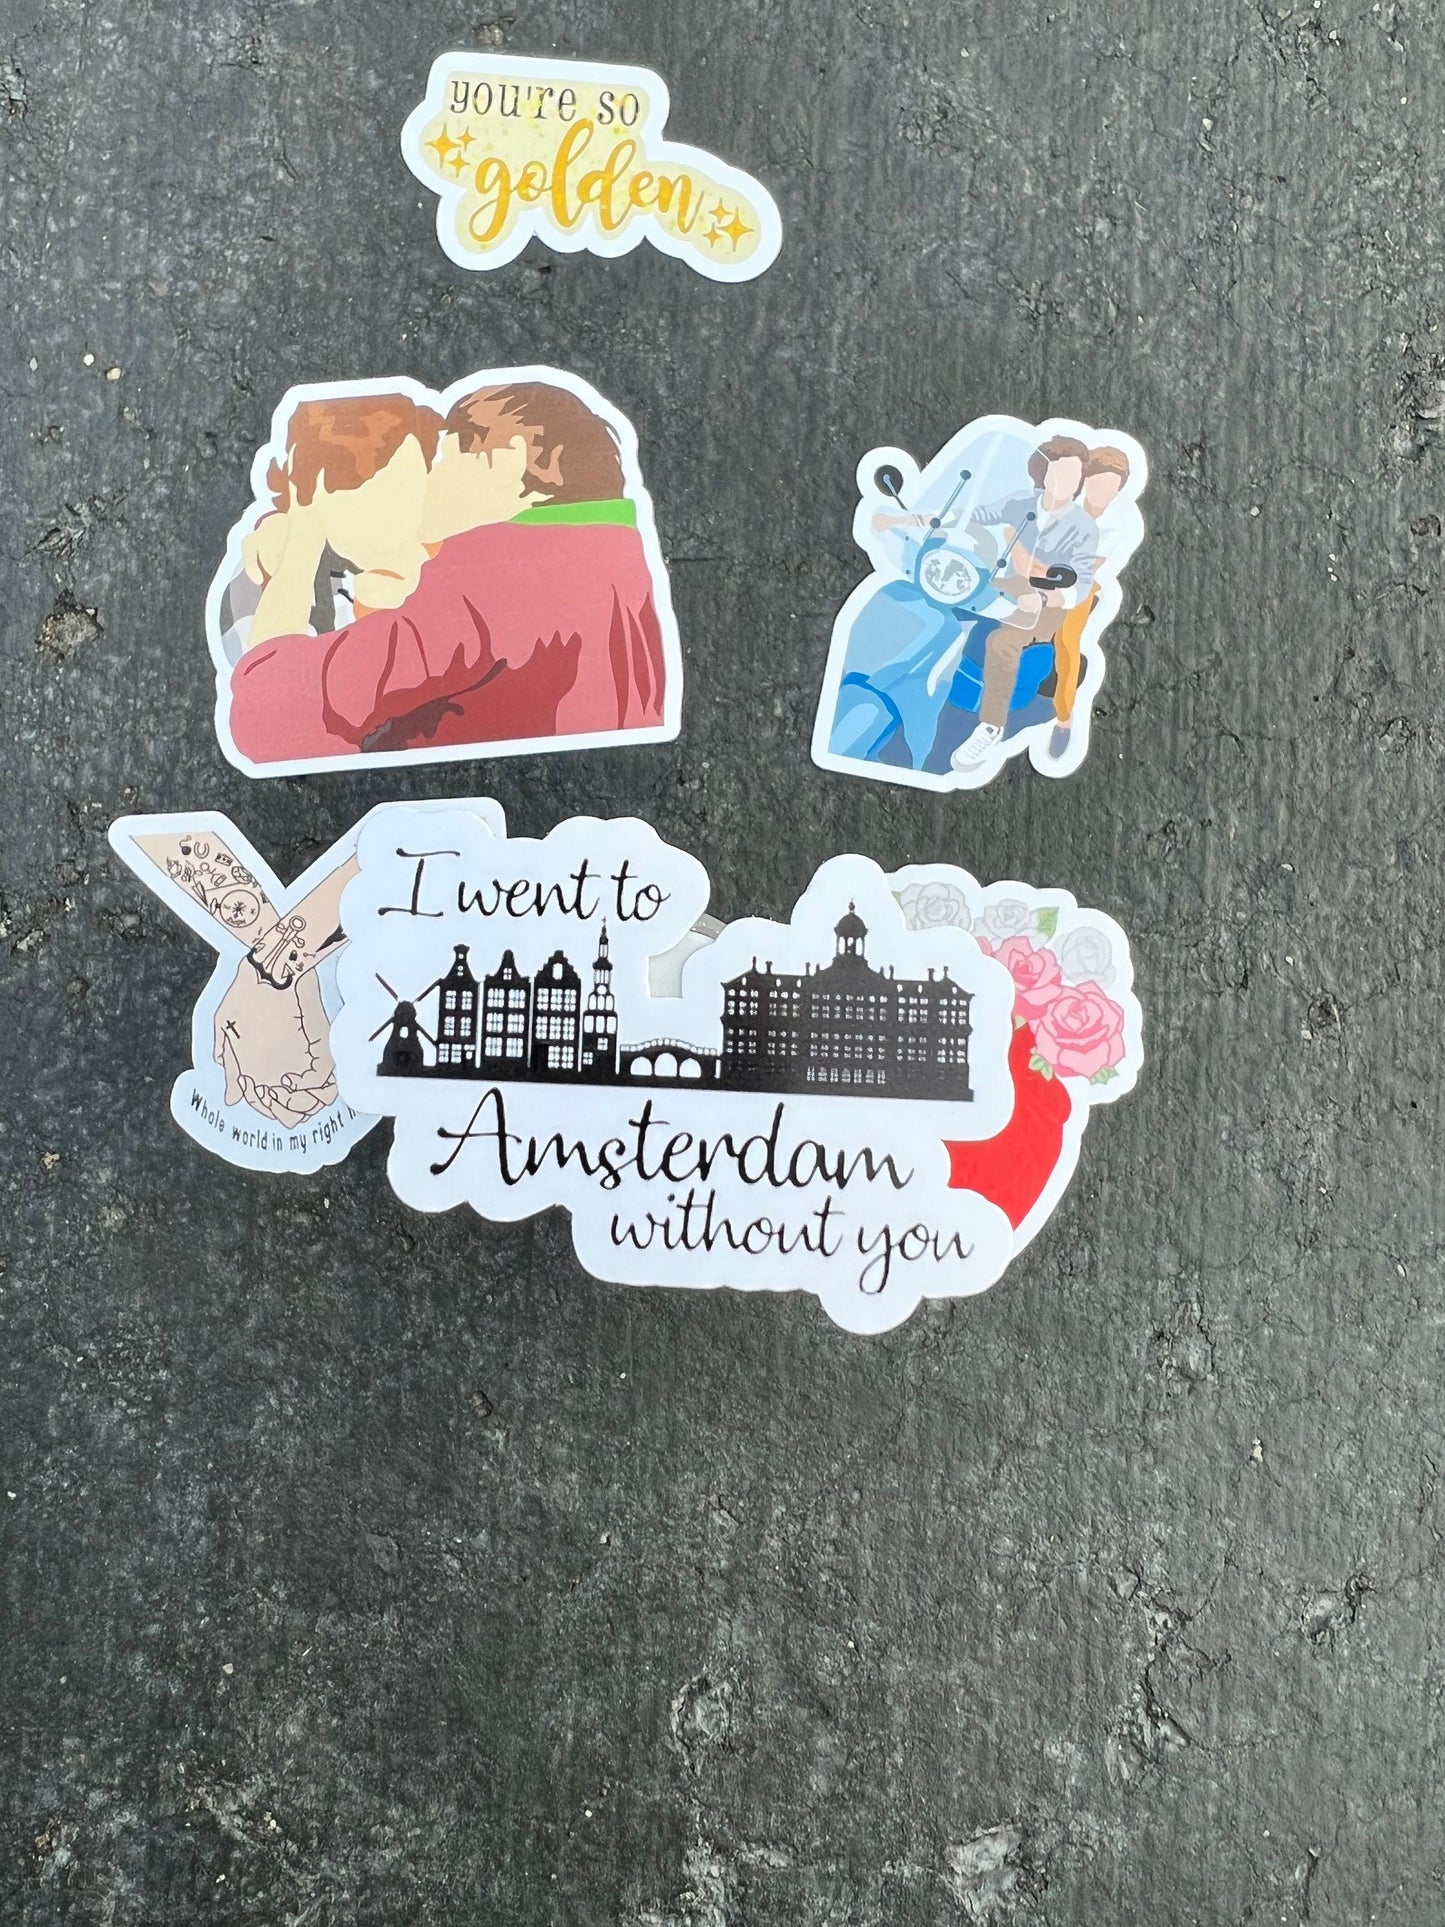 Mini Stickers/Sticker Pack - Waterproof Available || But Daddy, Golden, Adore You, Bad Day, Tommo Way, Amsterdam, Always You